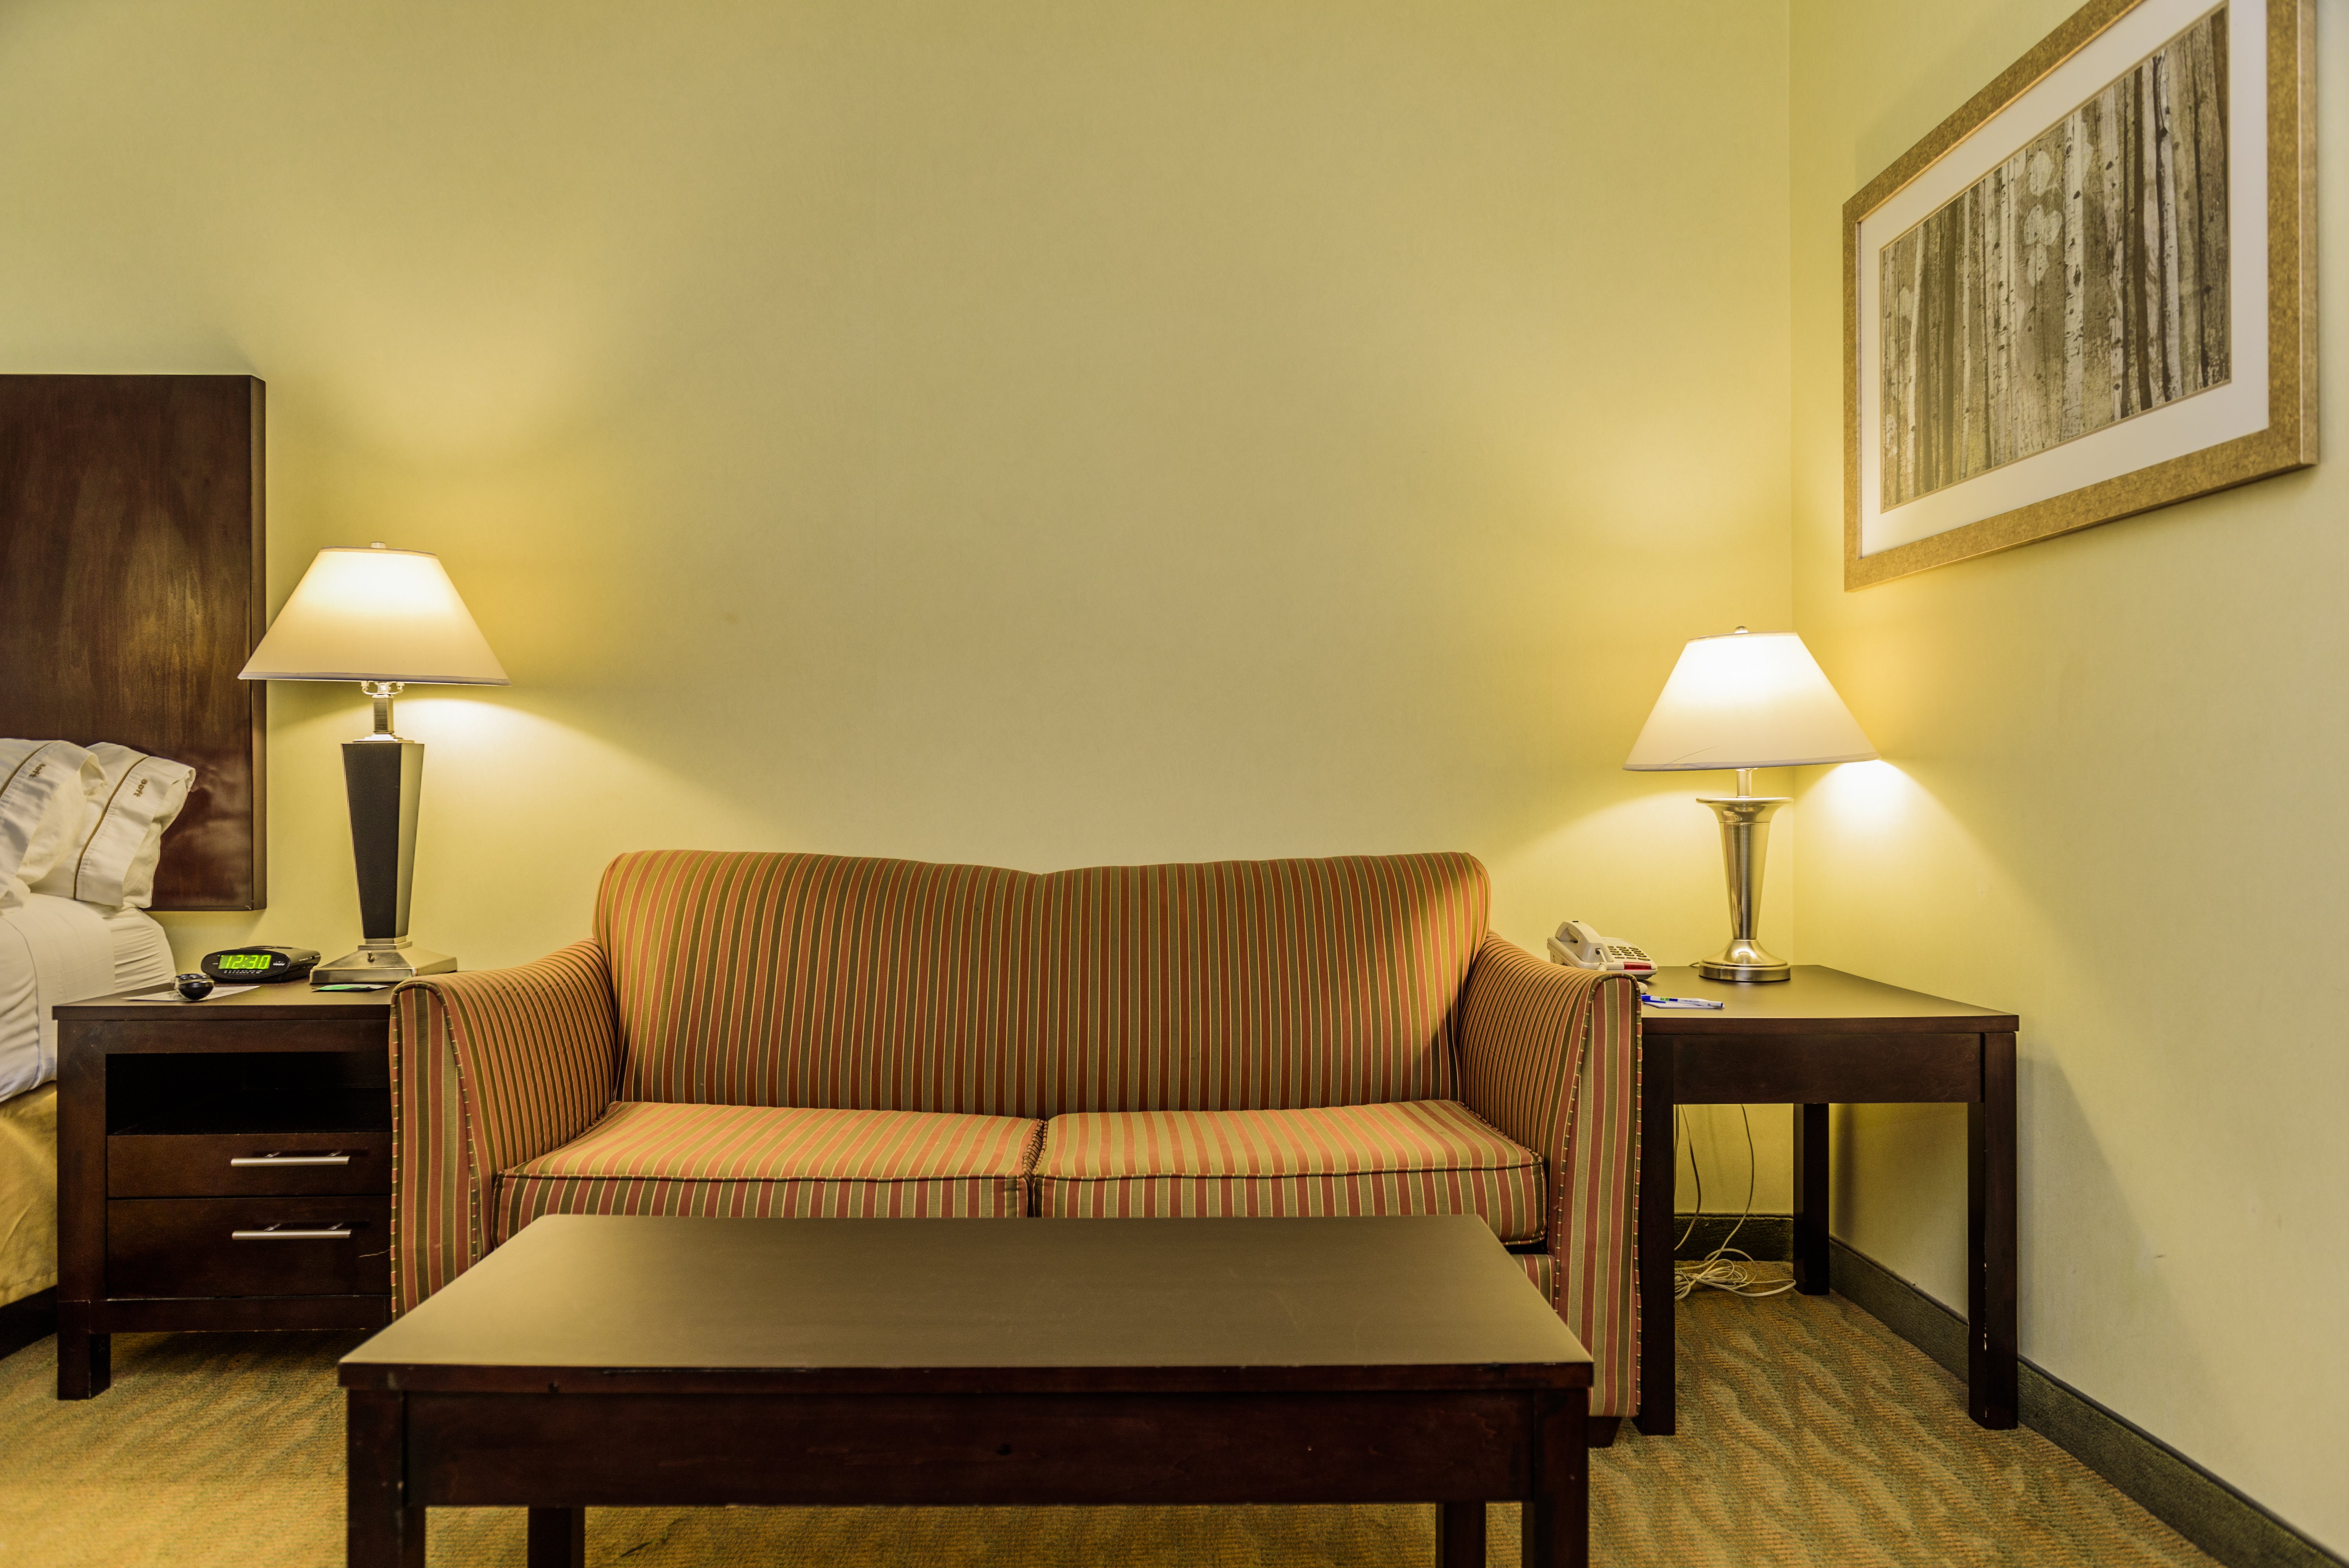 PULL OUT SOFA FOR EXTRA SLEEPING SPACE IN JR KING SUITES